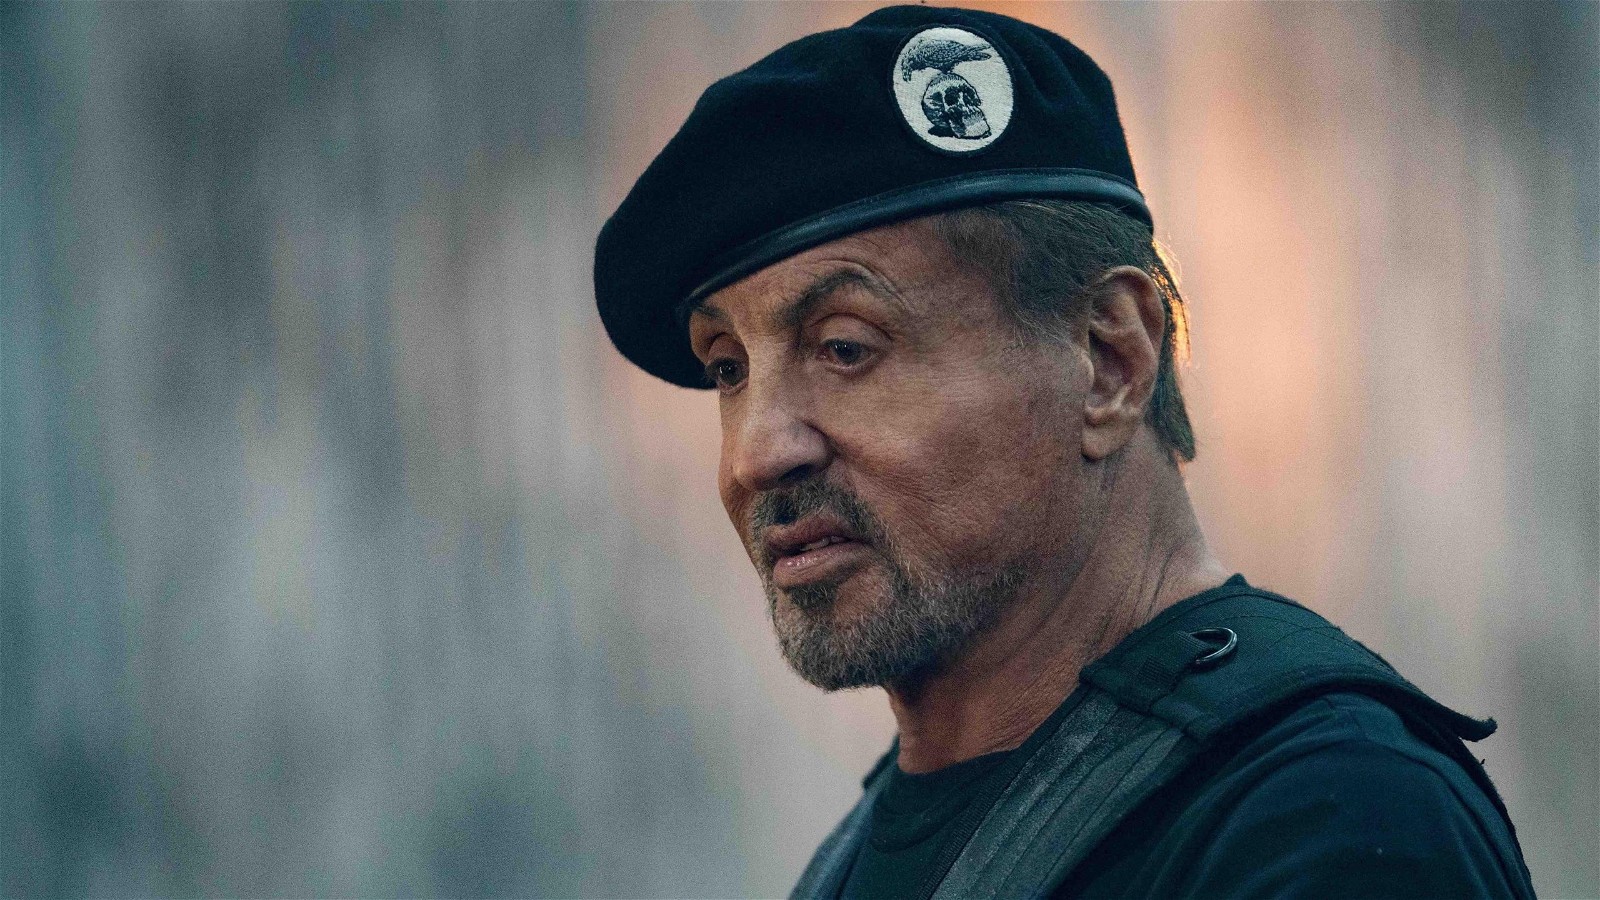 Sylvester Stallone in Expendables 4